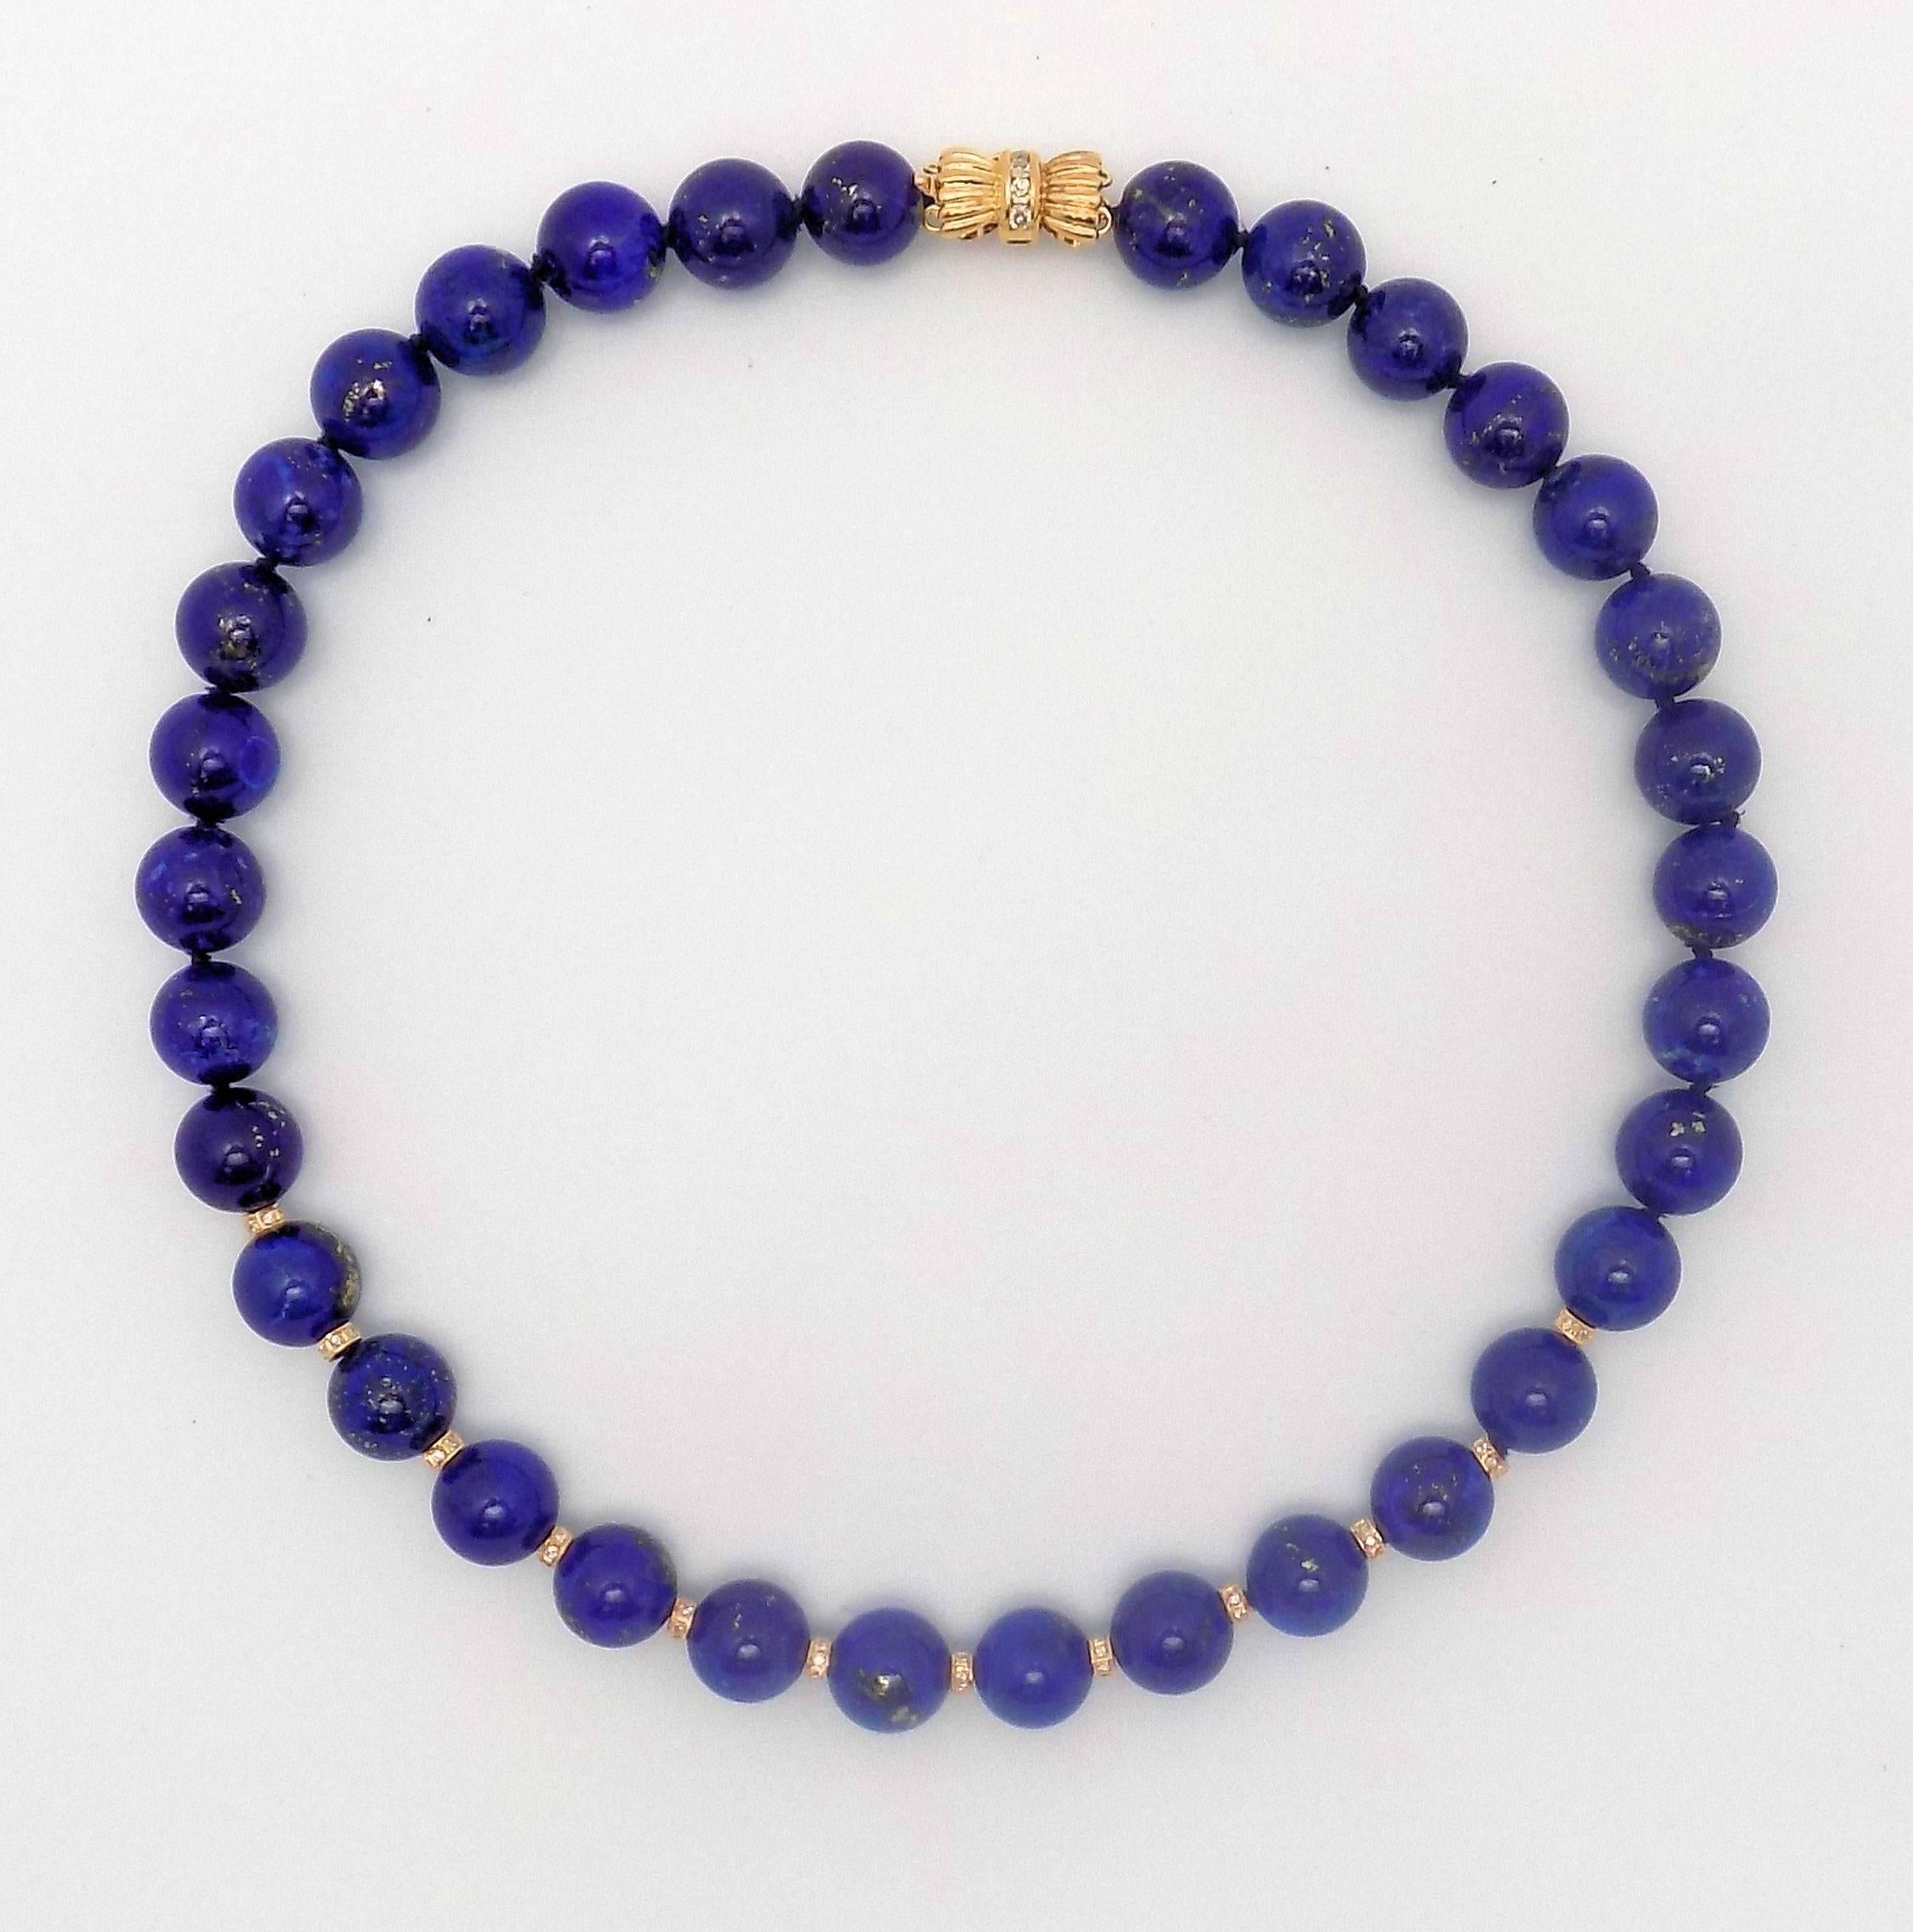 A very fine strand of uniform large size lapis lazuli beads measuring 12 mm.  There are 33 beads, spaced in the front with twelve diamond-set rondelles.  Clasp also contains diamonds.  Yellow gold 14 Karat, 0.75 carat. total weight in round diamonds